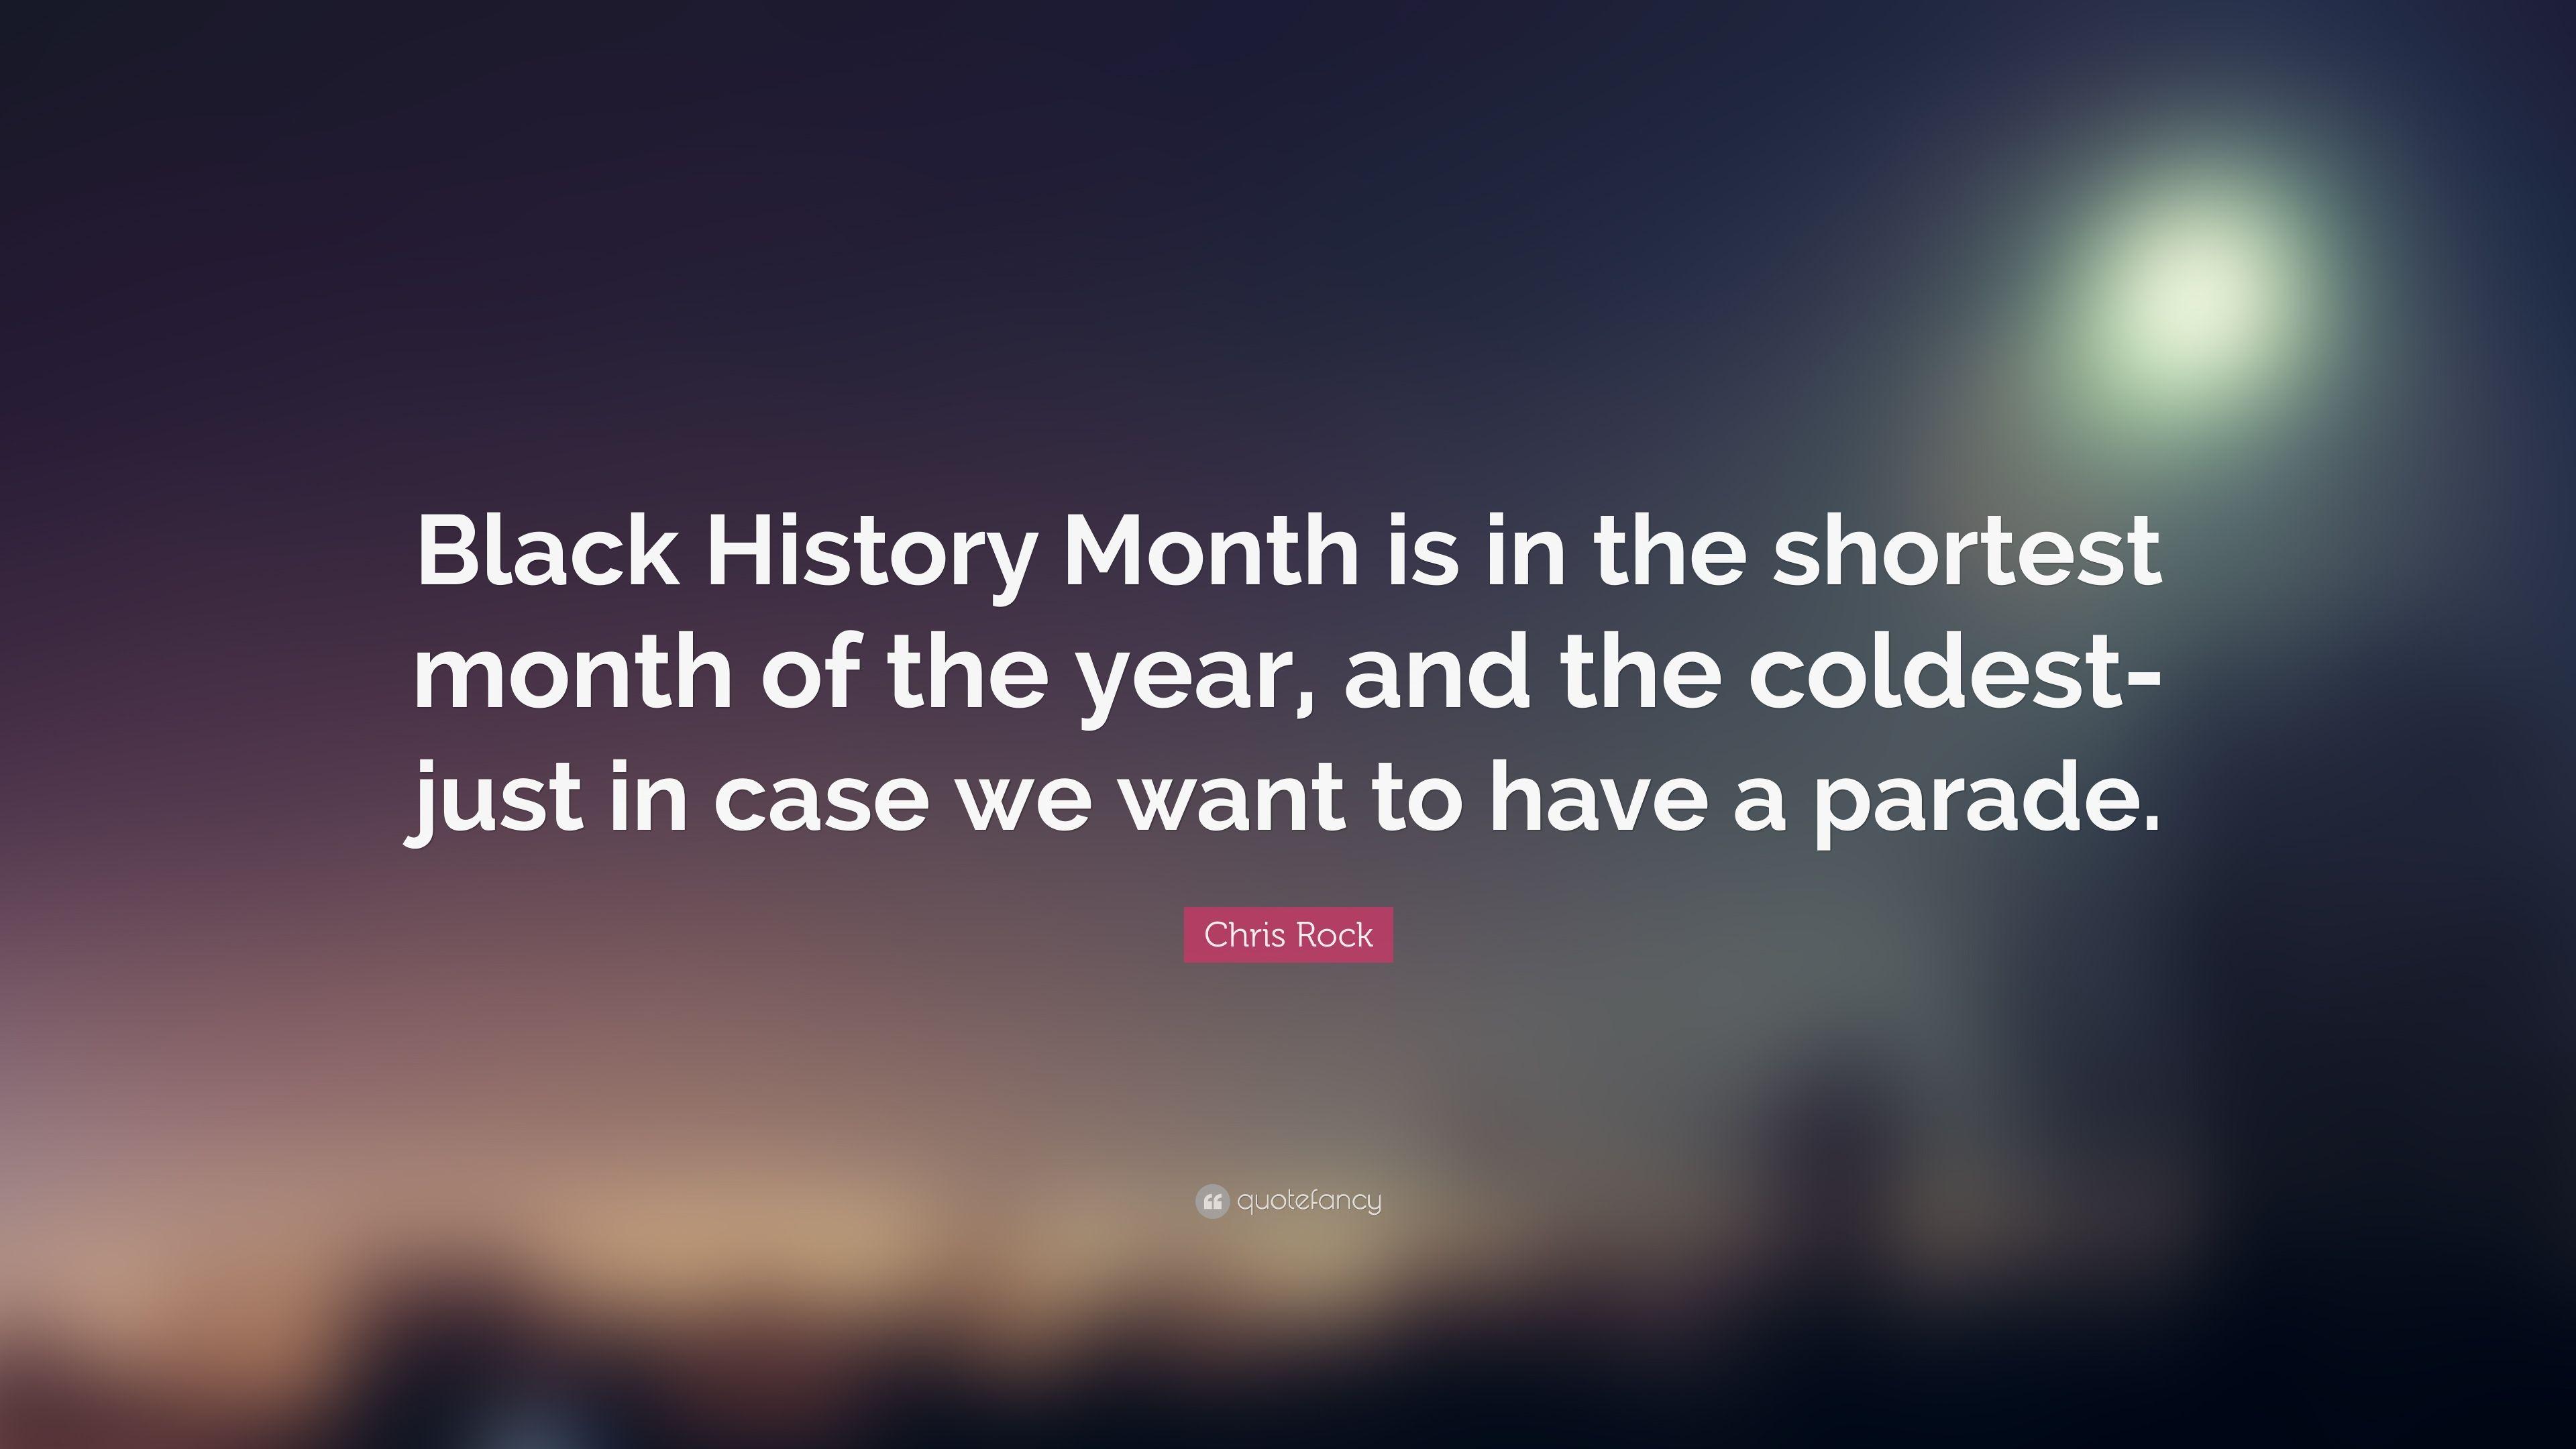 Chris Rock Quote: “Black History Month is in the shortest month